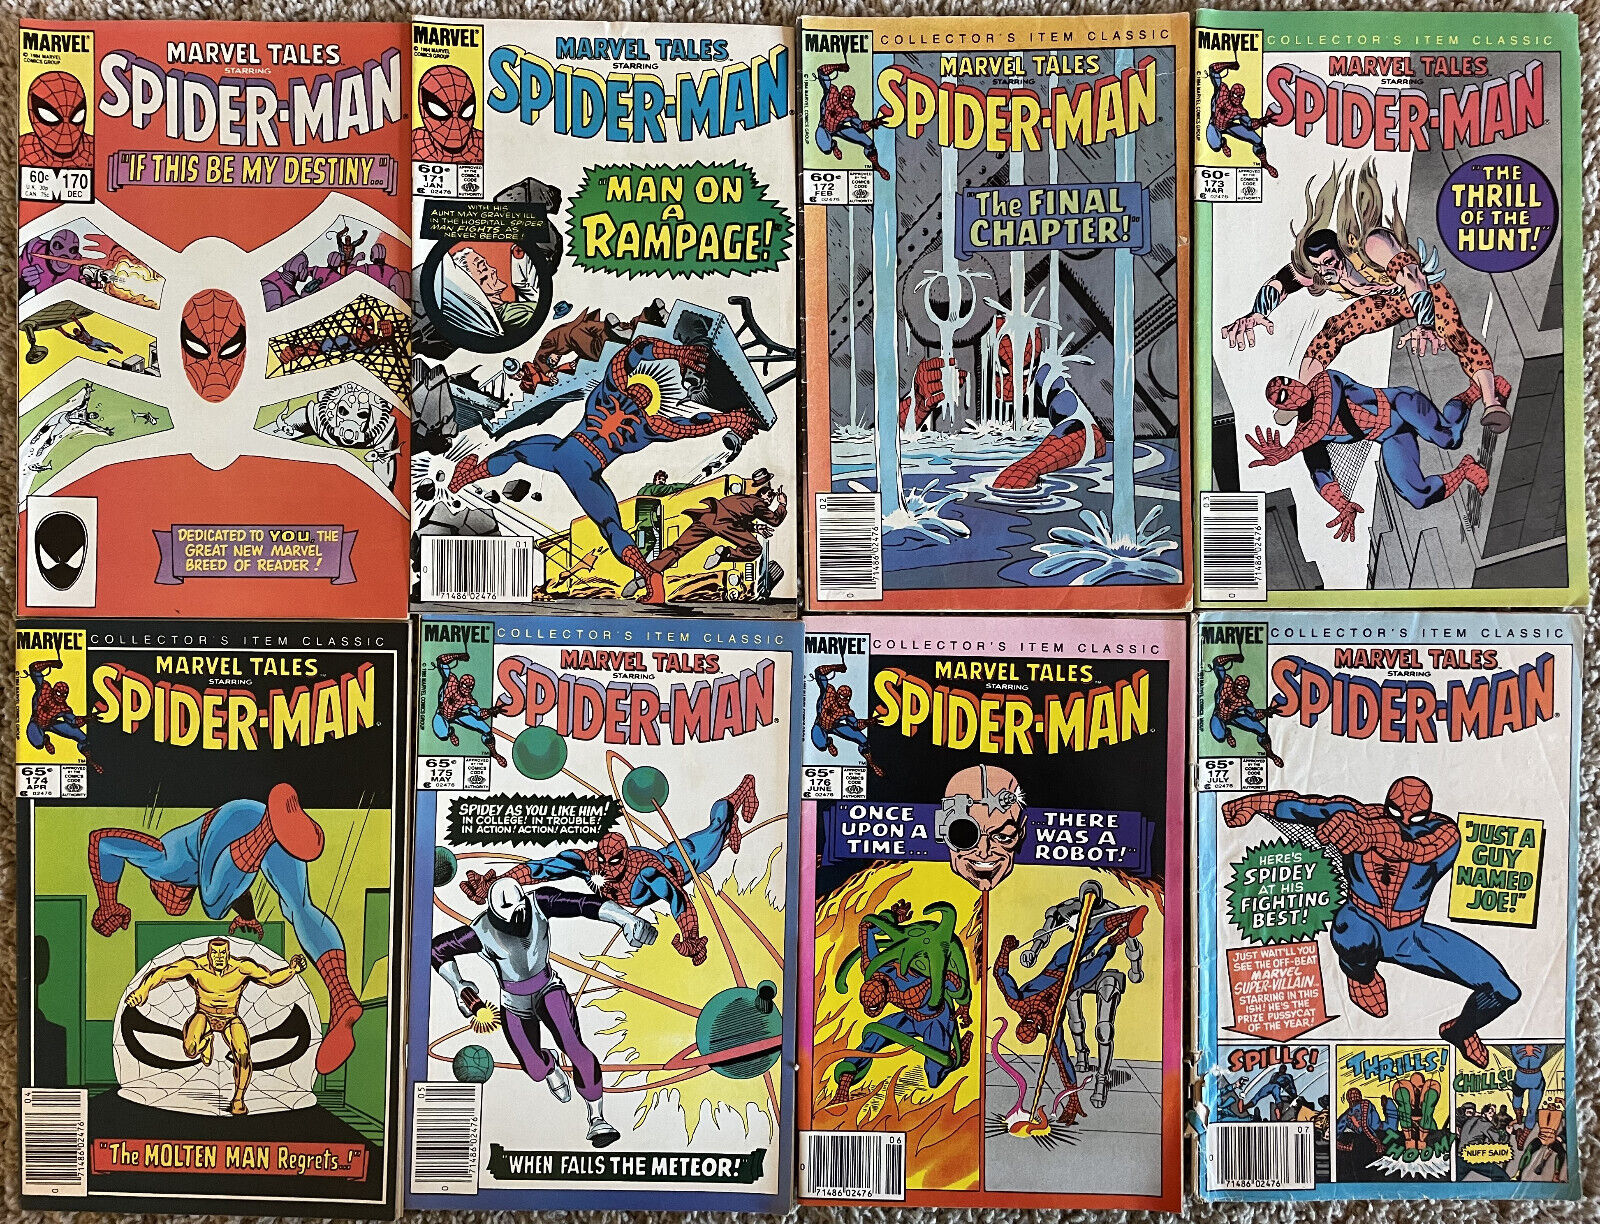 Marvel Tales Spider-Man Lot #15 Marvel comic  series from the 1970s